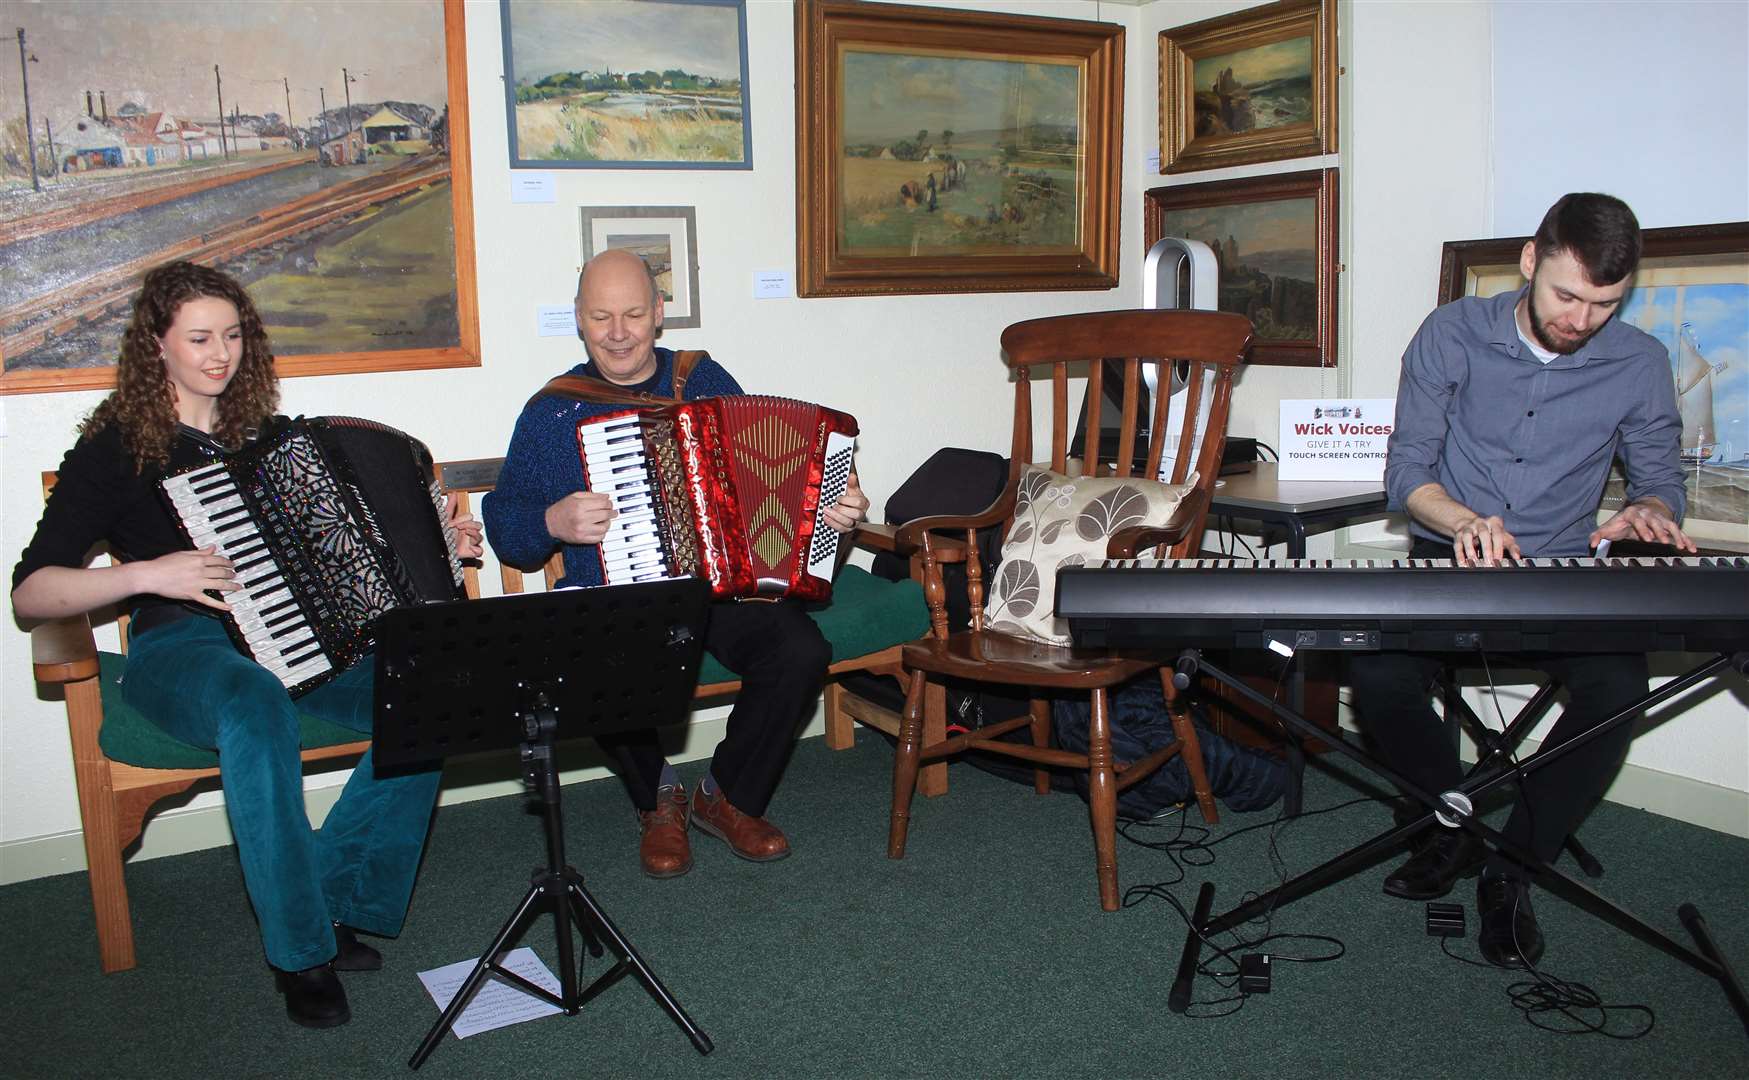 Musicians Joanne Sutherland, Addie Harper and Richard Smith performing during the event on Monday. Picture: Alan Hendry